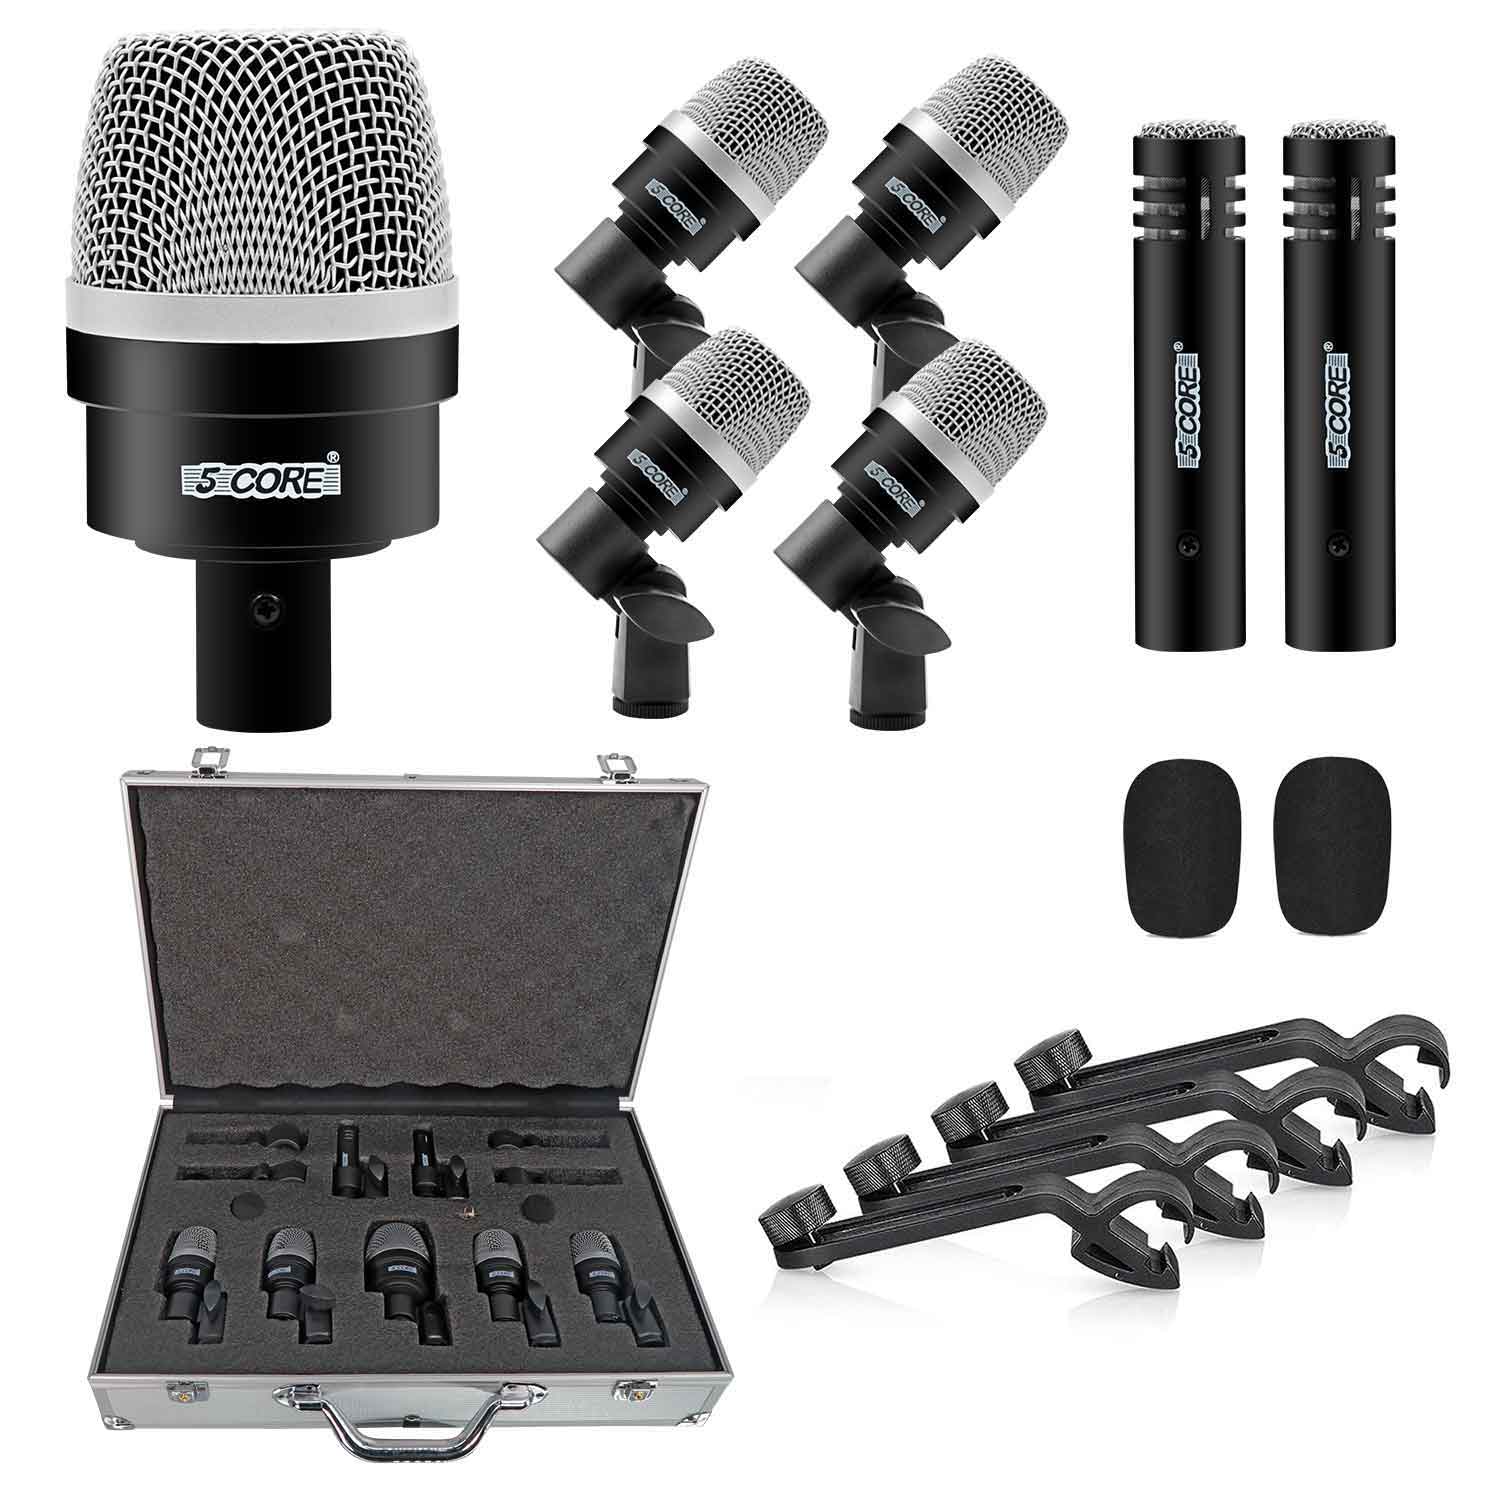 Professional drum microphone set for capturing every nuance of drum performance.